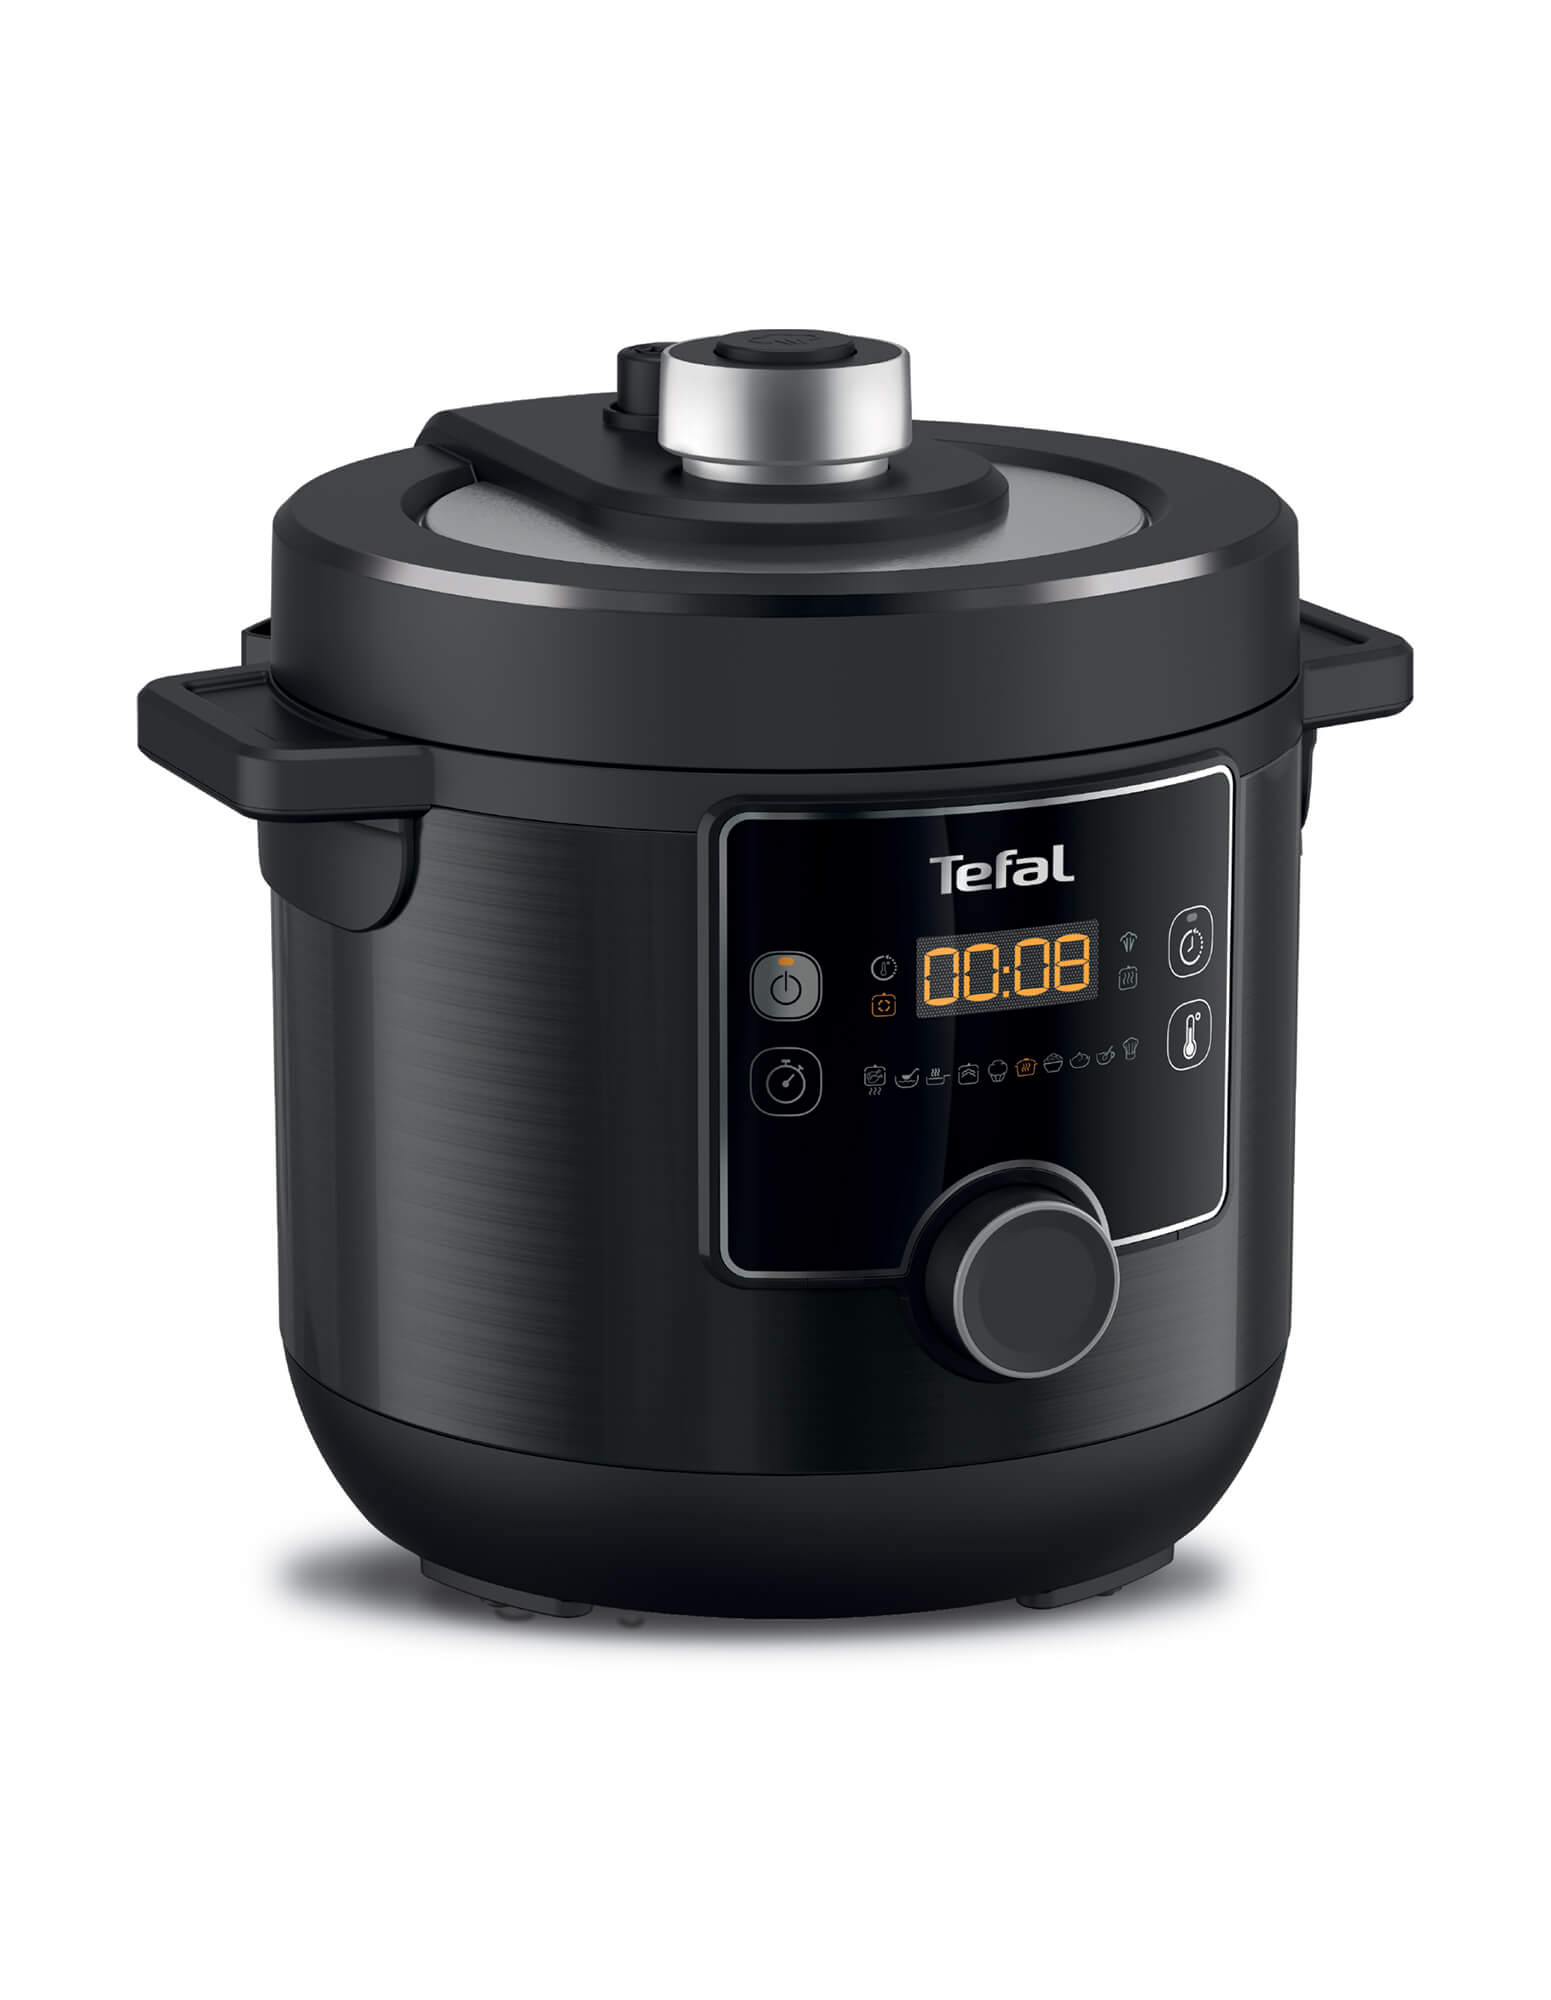 Turbo Cuisine Maxi Electric Pressure Cooker and Multicooker CY7778